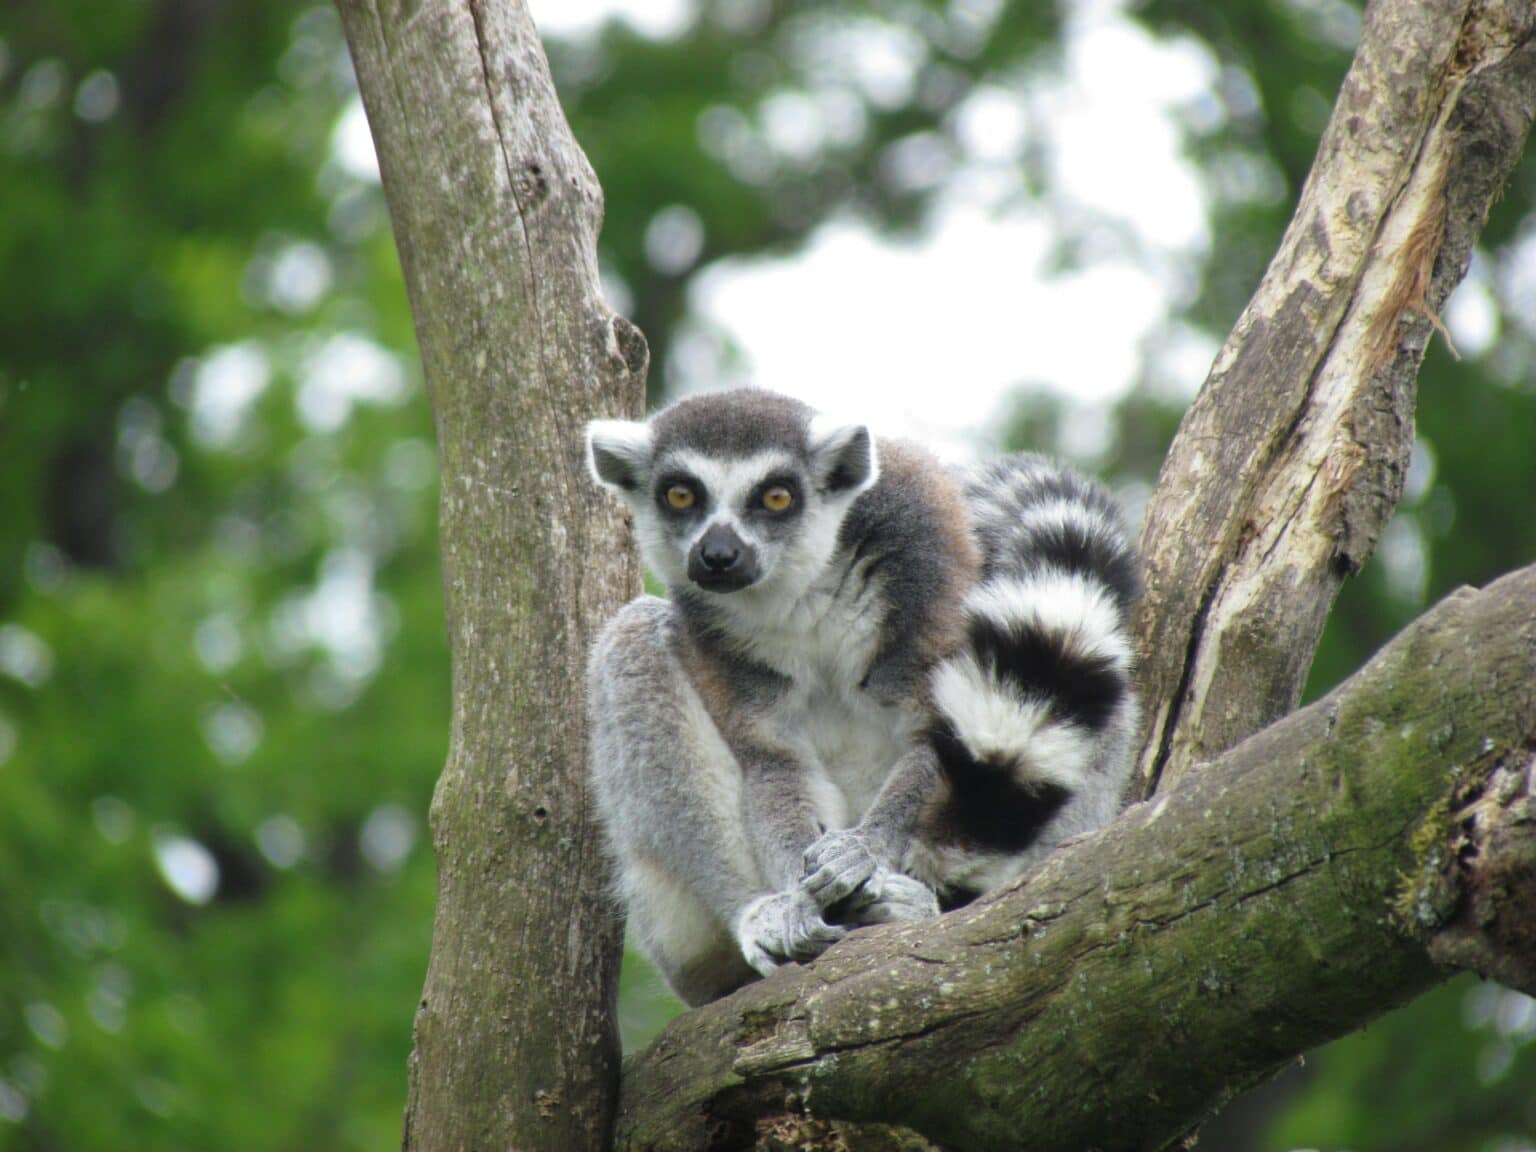 A ring-tailed lemur is just one of the creatures you'll meet.